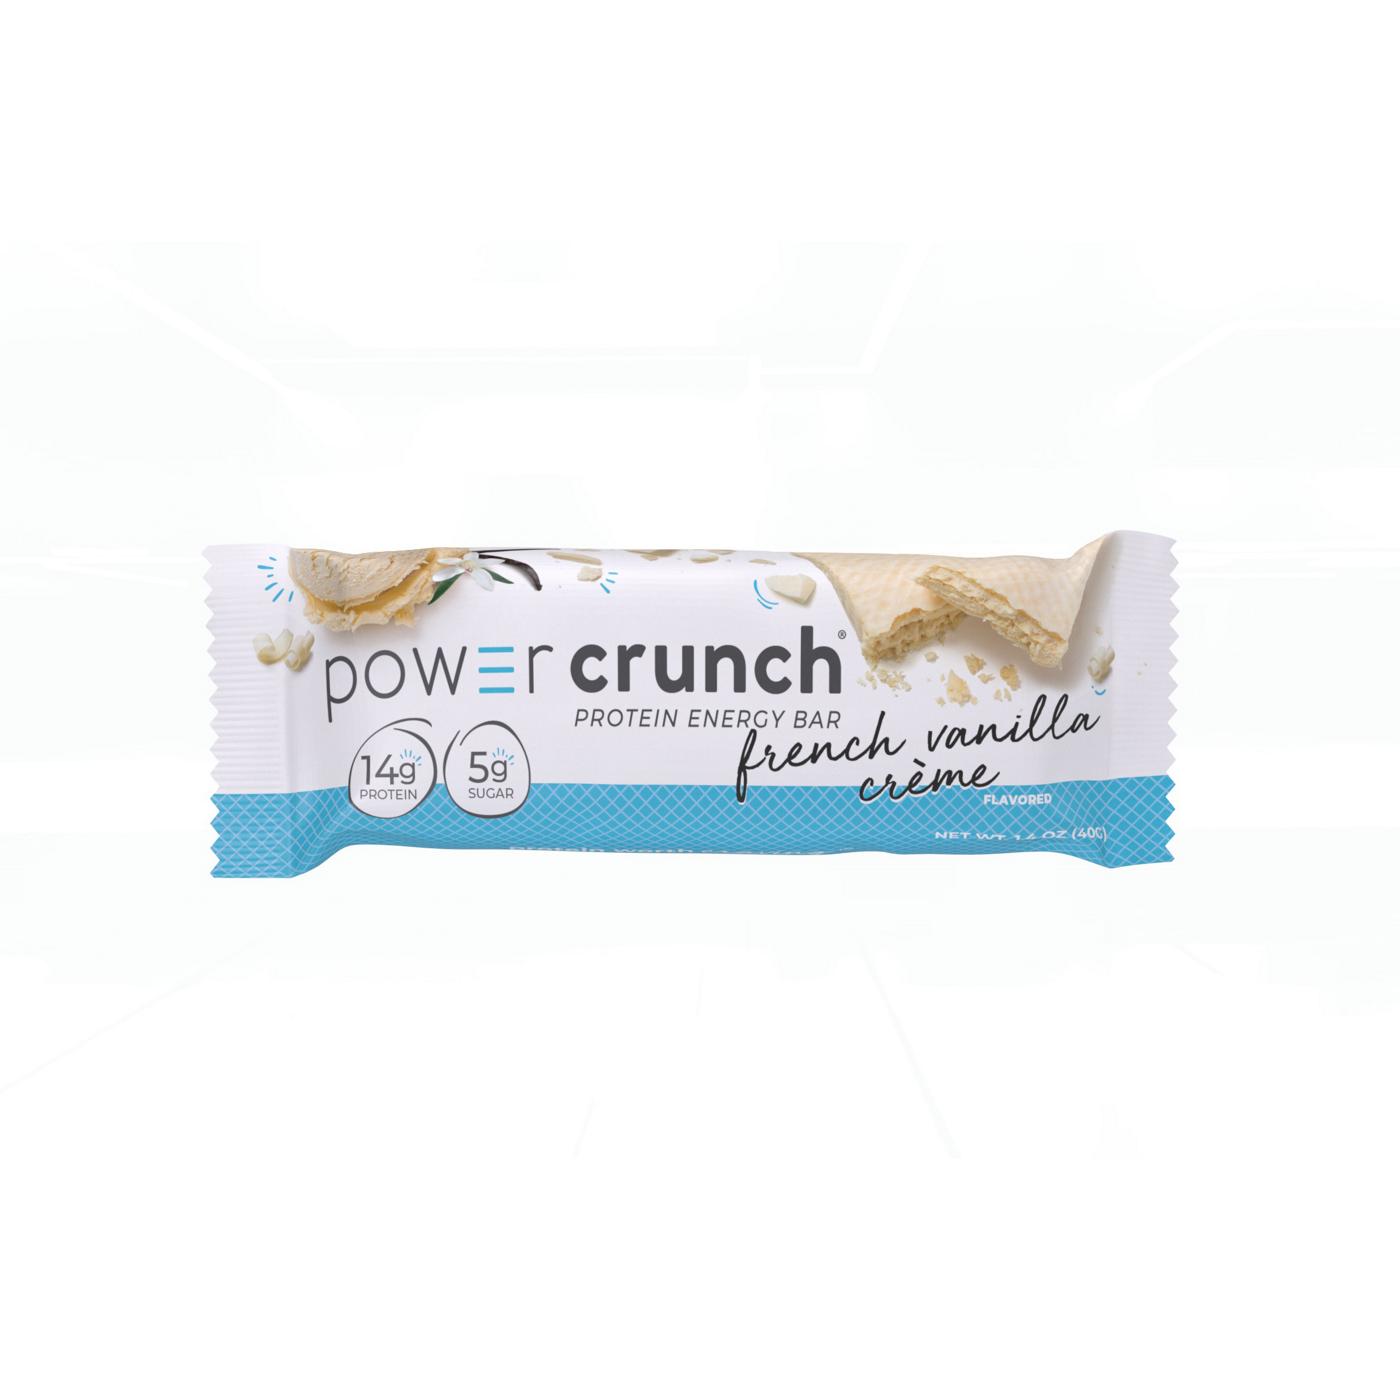 Power Crunch 14g Protein Energy Bar - French Vanilla Crème; image 1 of 2